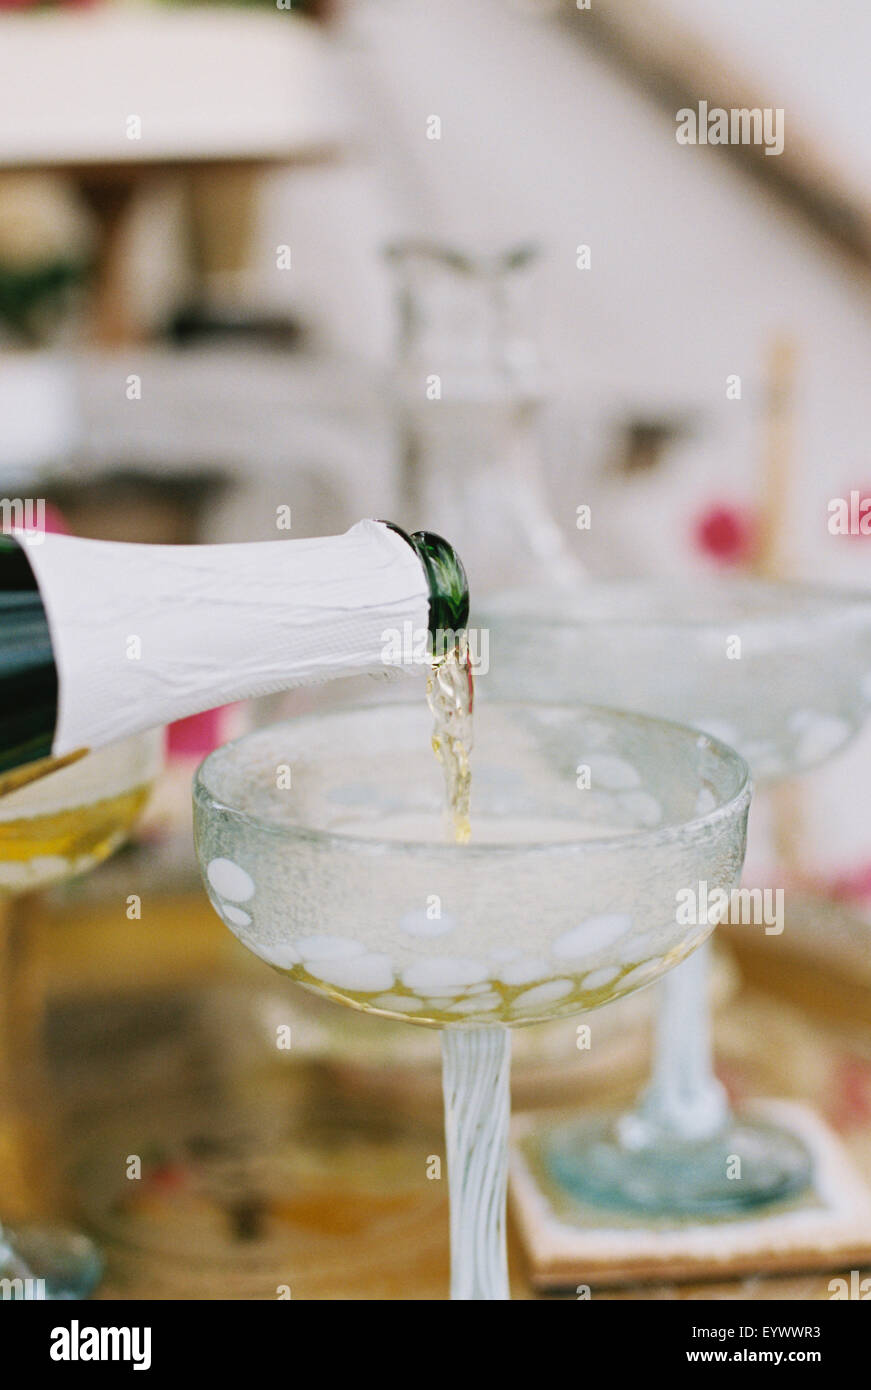 champagne being poured from bottle into a glass. Stock Photo